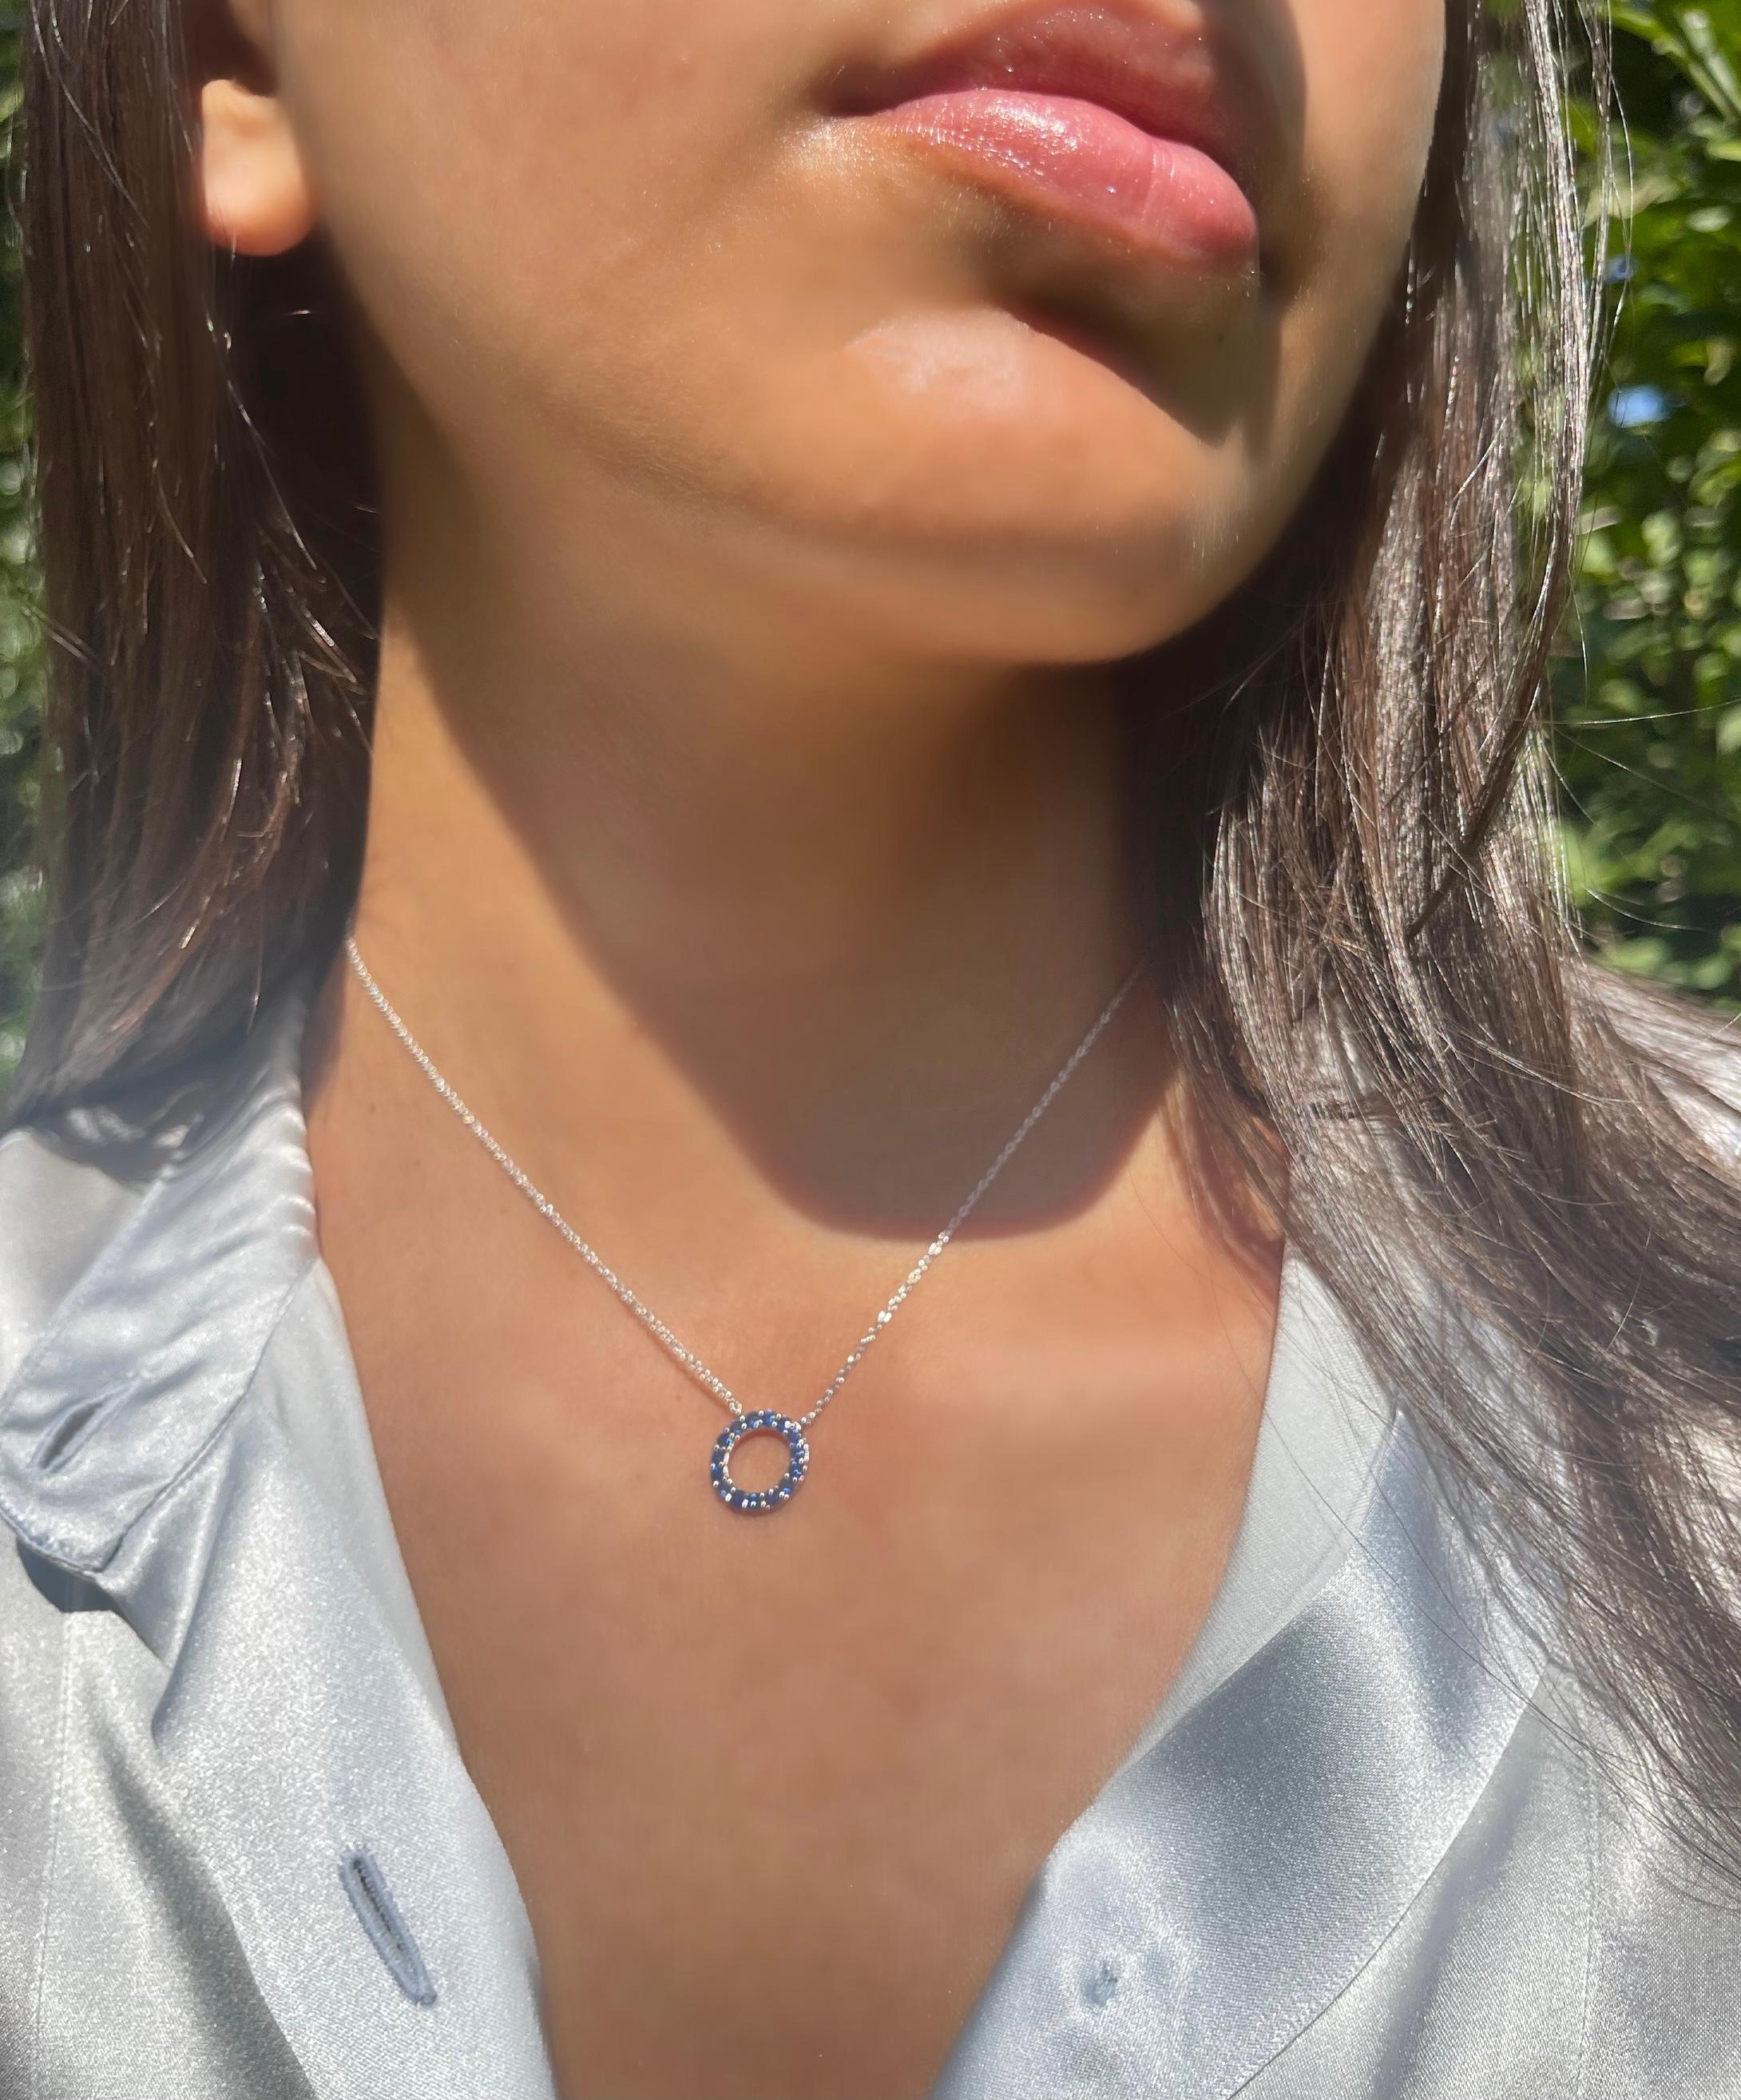 Genuine blue sapphires in a classic circle shape is the perfect necklace to layer or wear on its own. Enjoy this necklace as an everyday piece! Made with .925 Sterling Silver. 1.92 total carats. External diameter of the circle measures 0.5